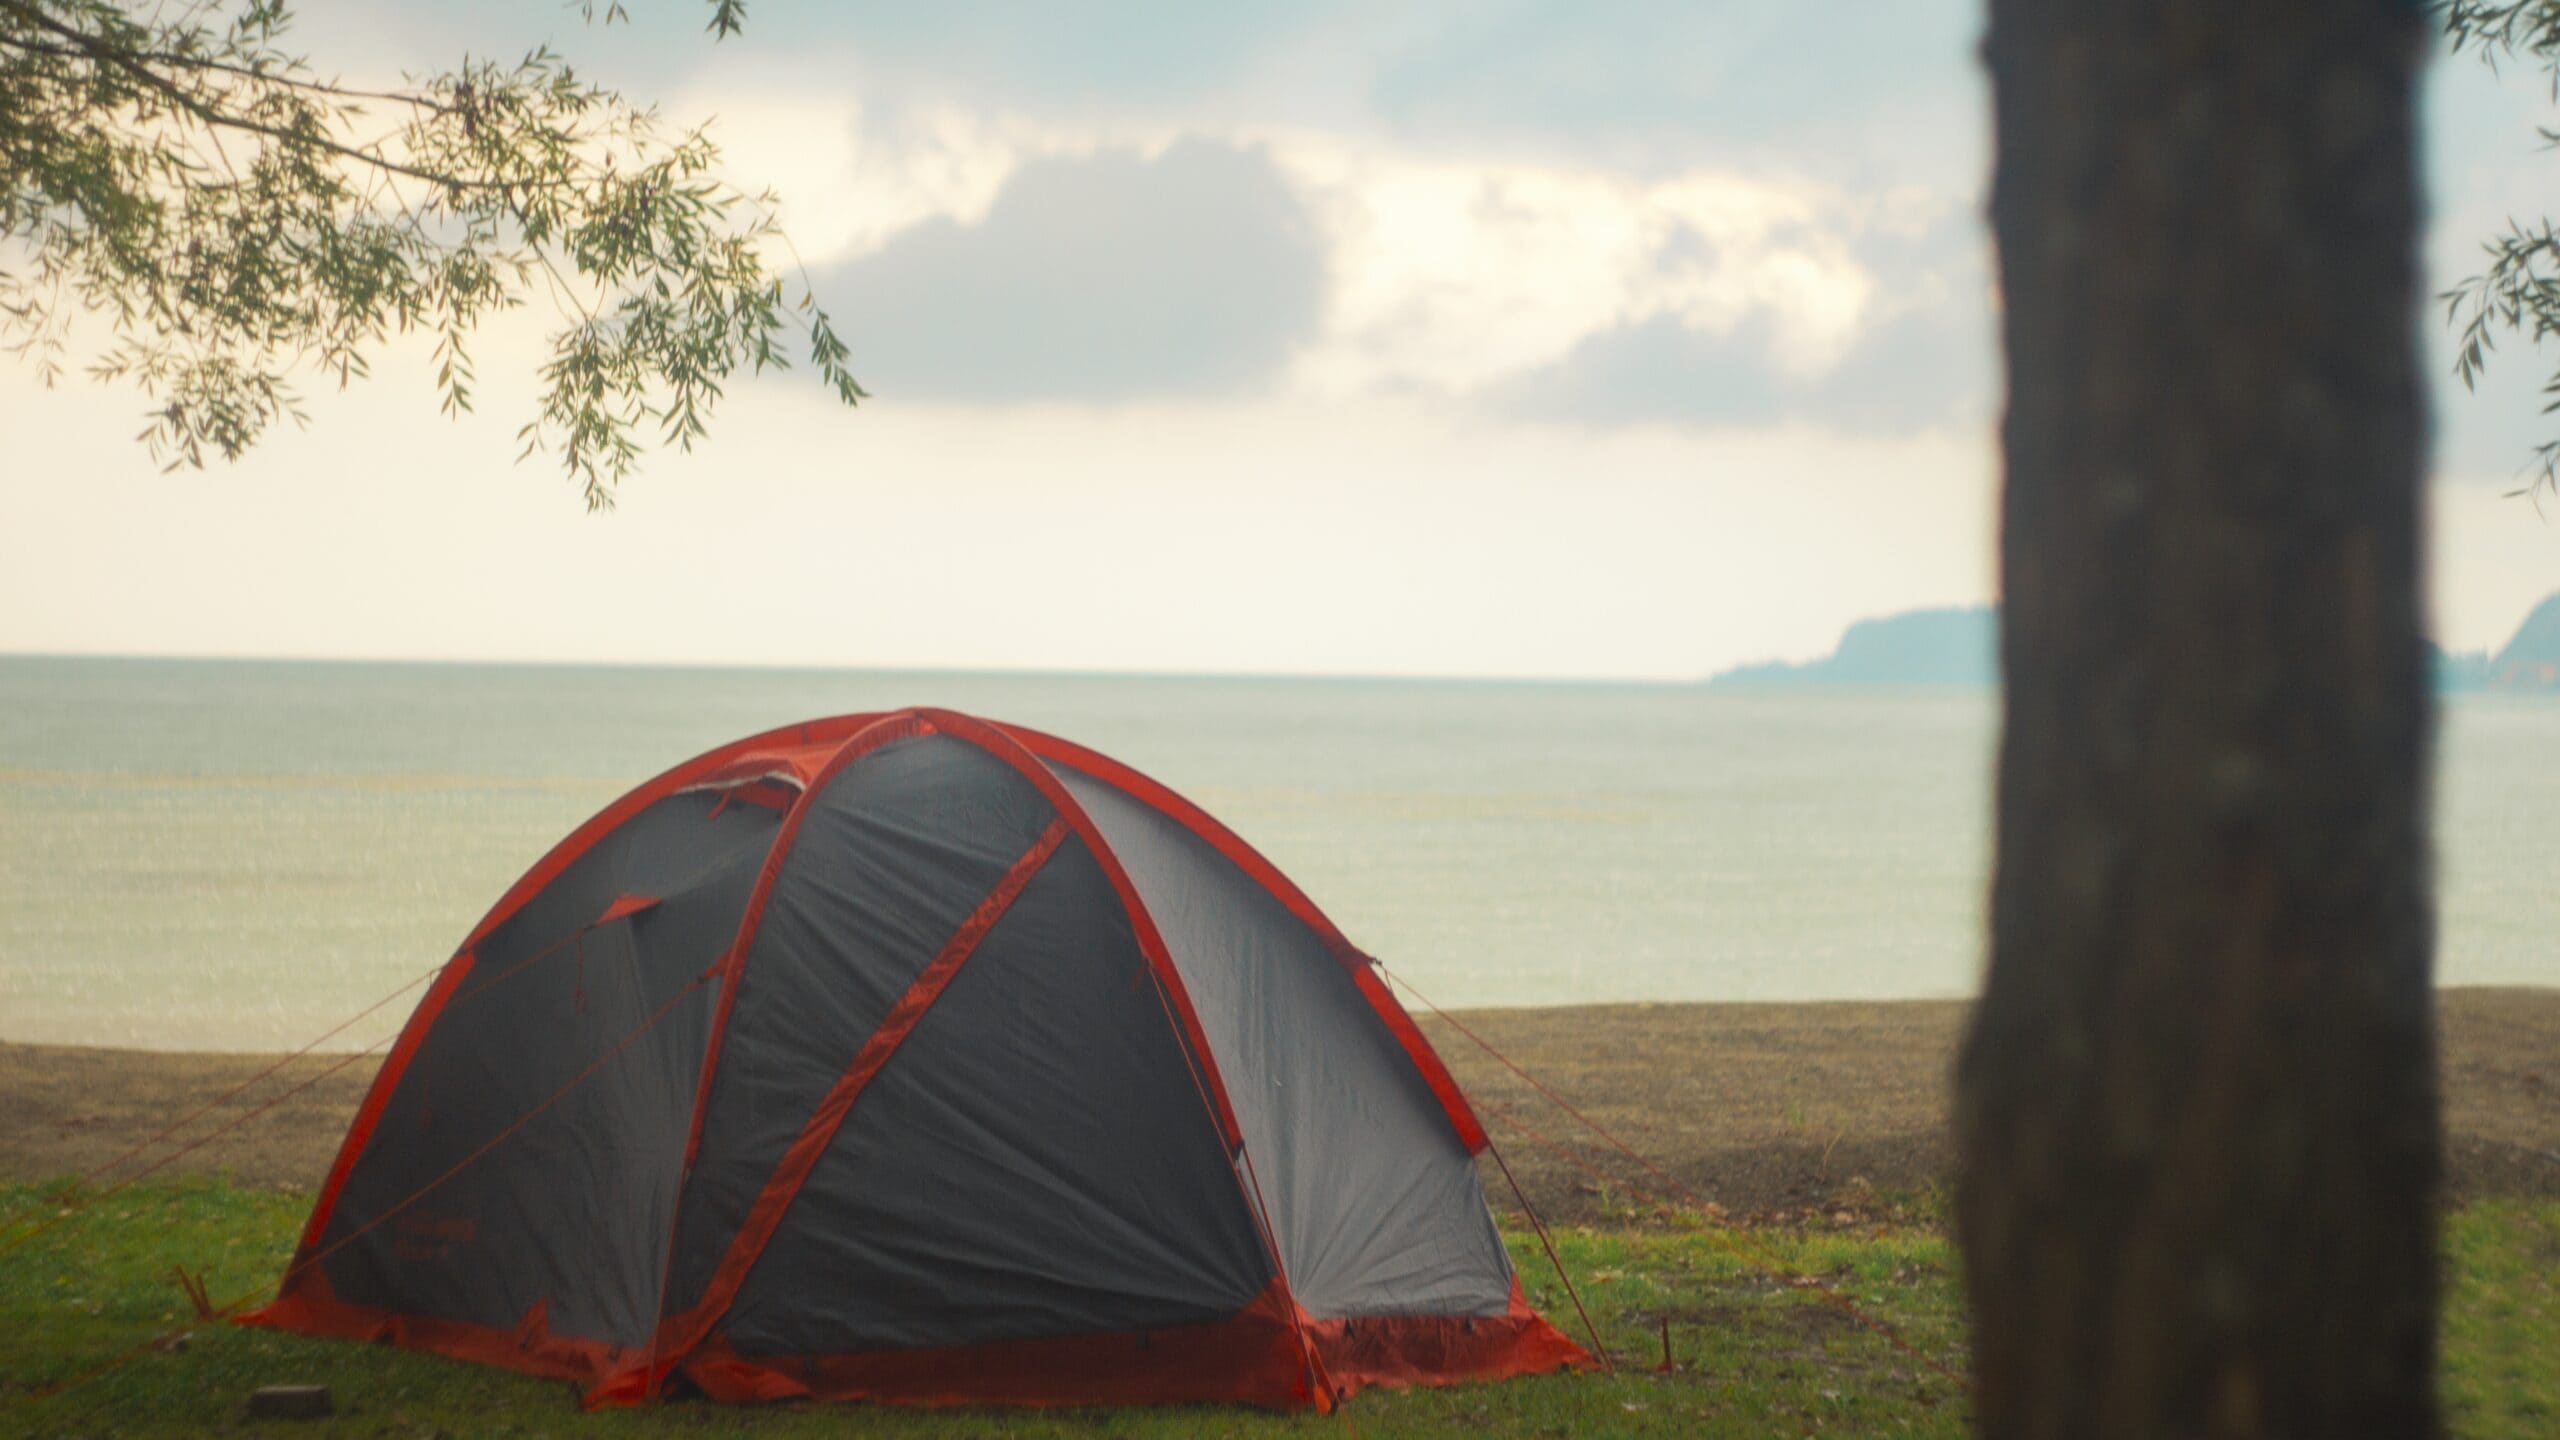 Camping Tent Brands